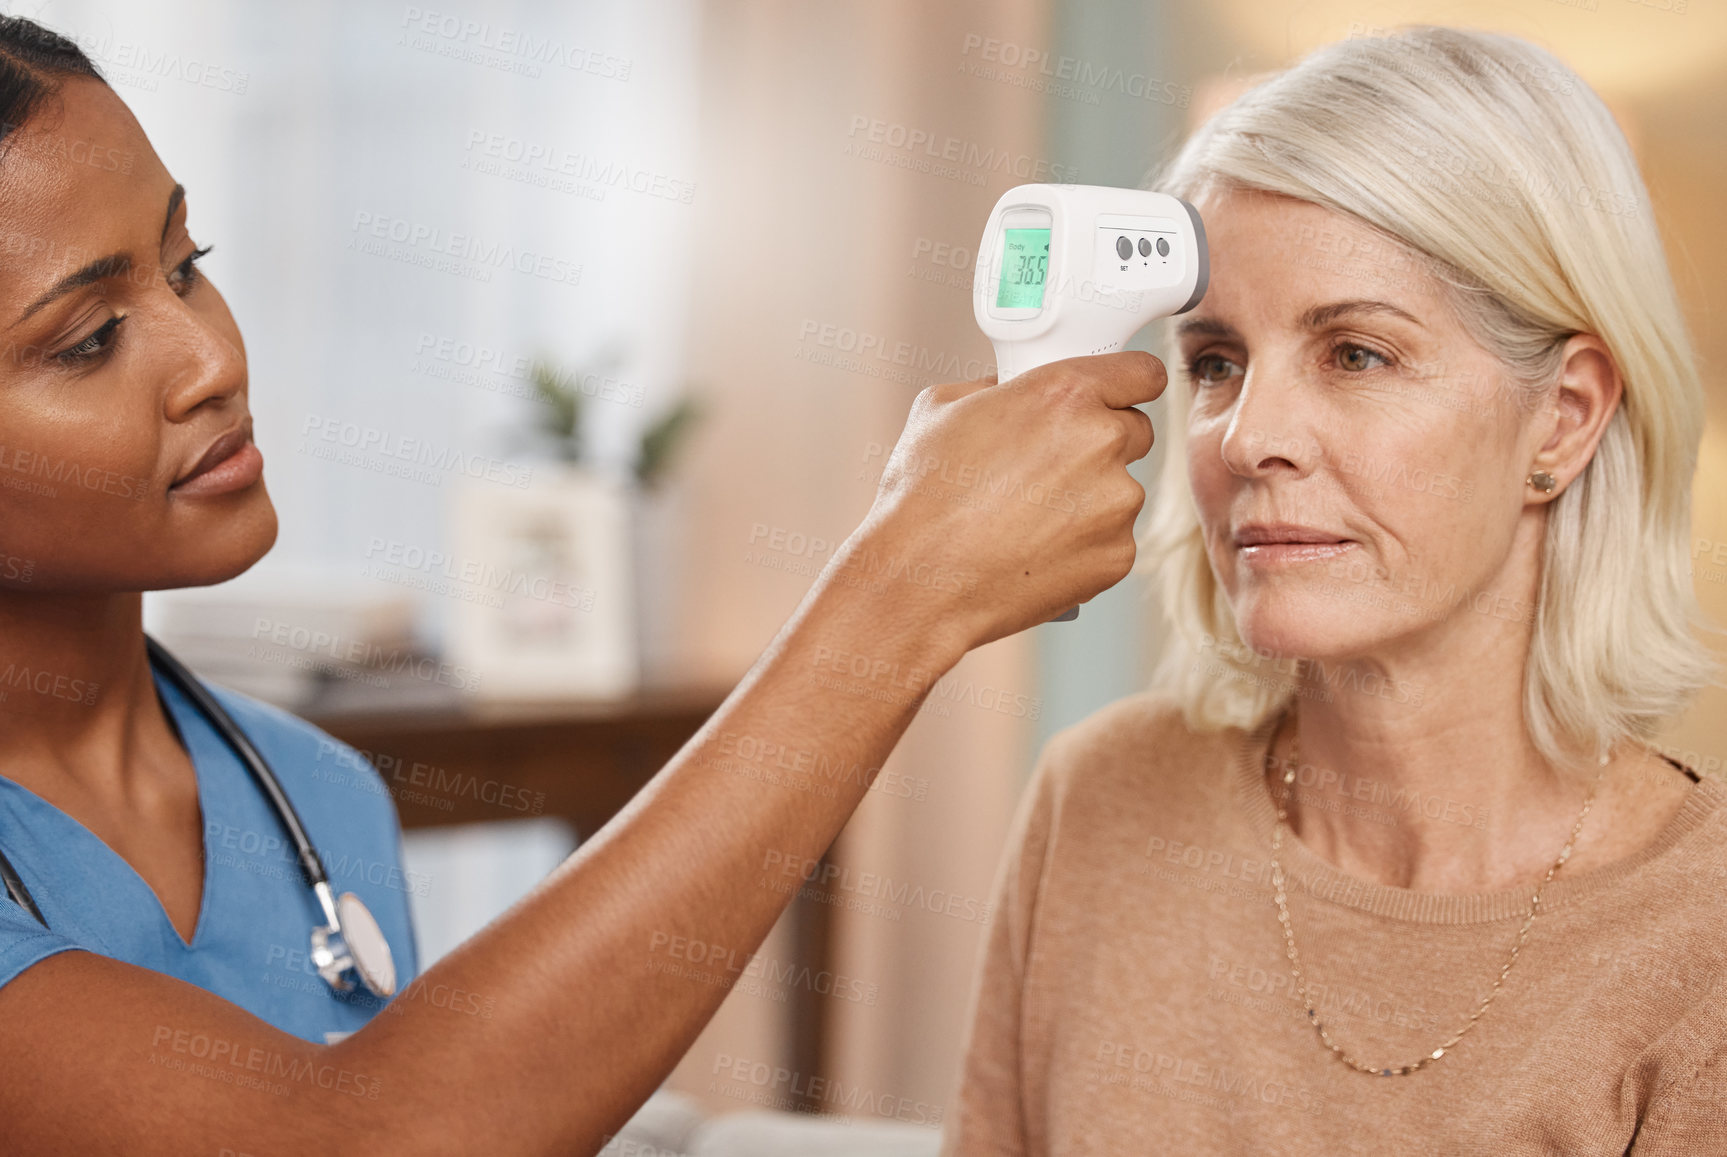 Buy stock photo Shot of a doctor examining a mature woman with a thermometer at home